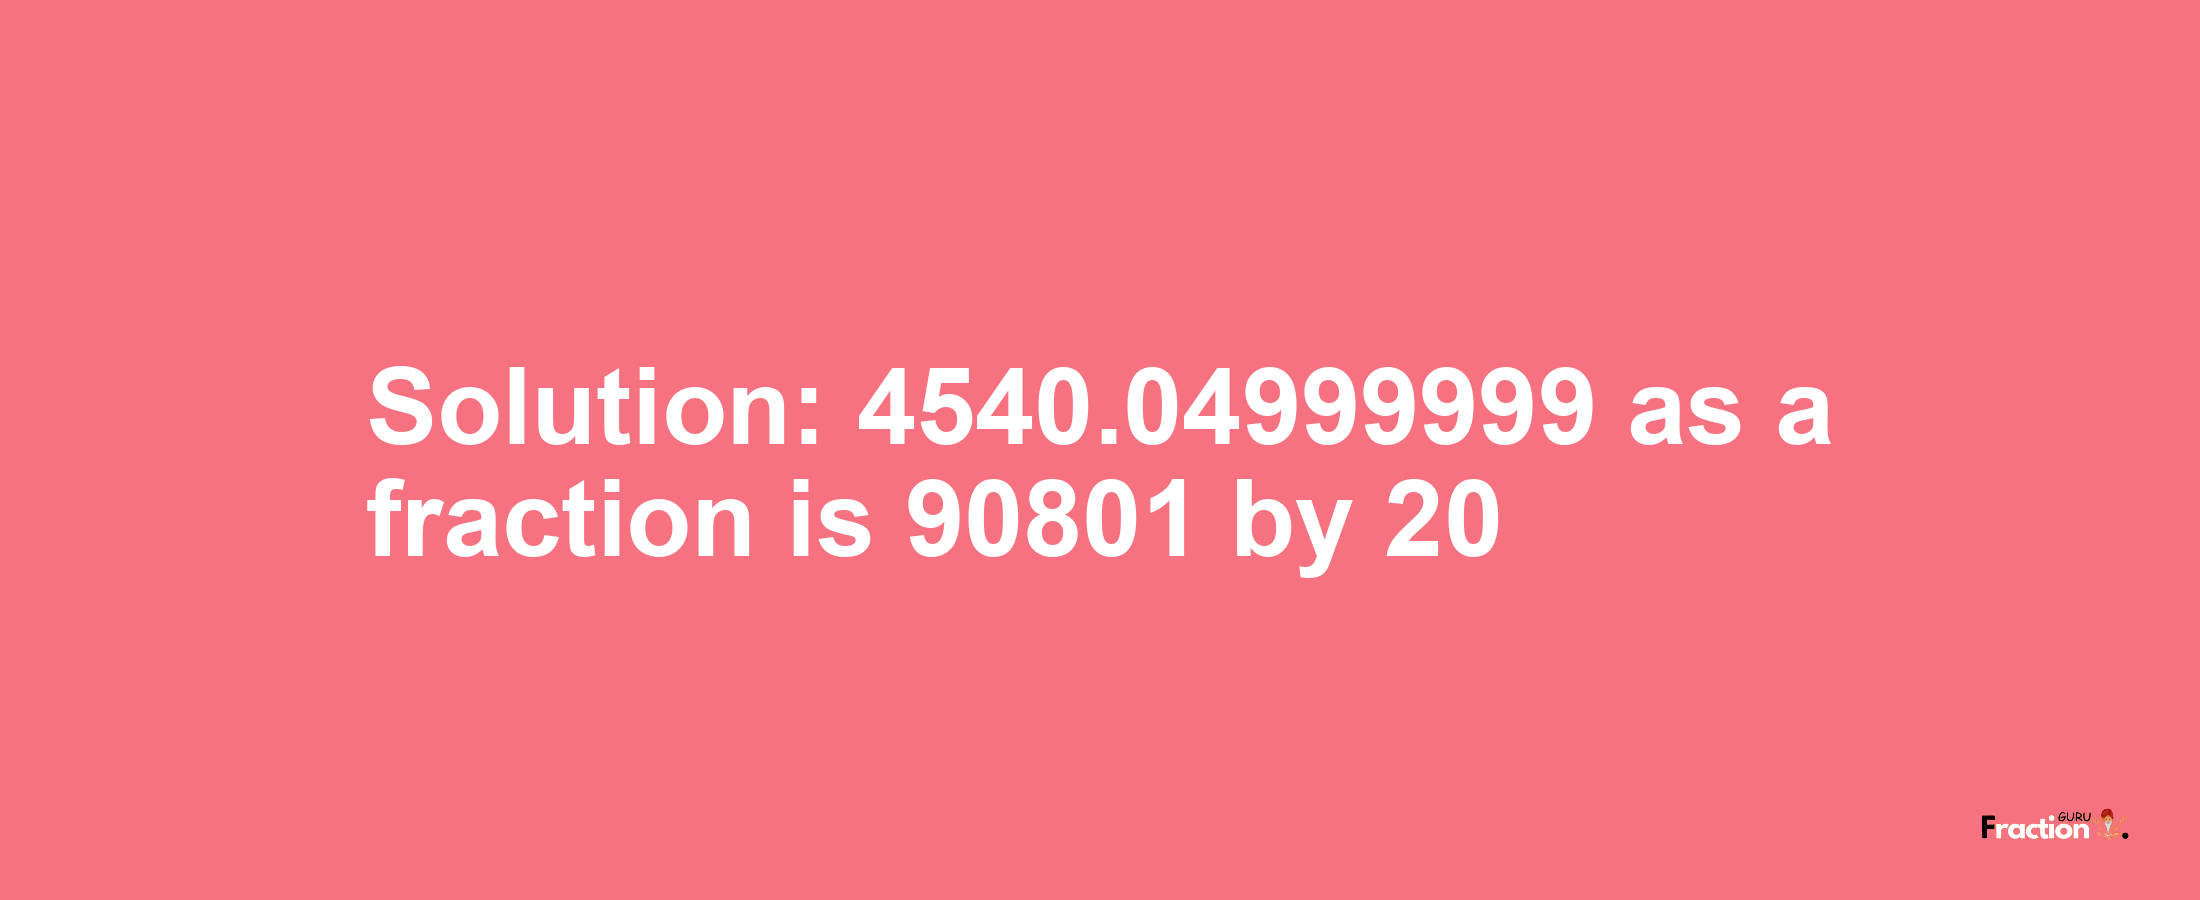 Solution:4540.04999999 as a fraction is 90801/20